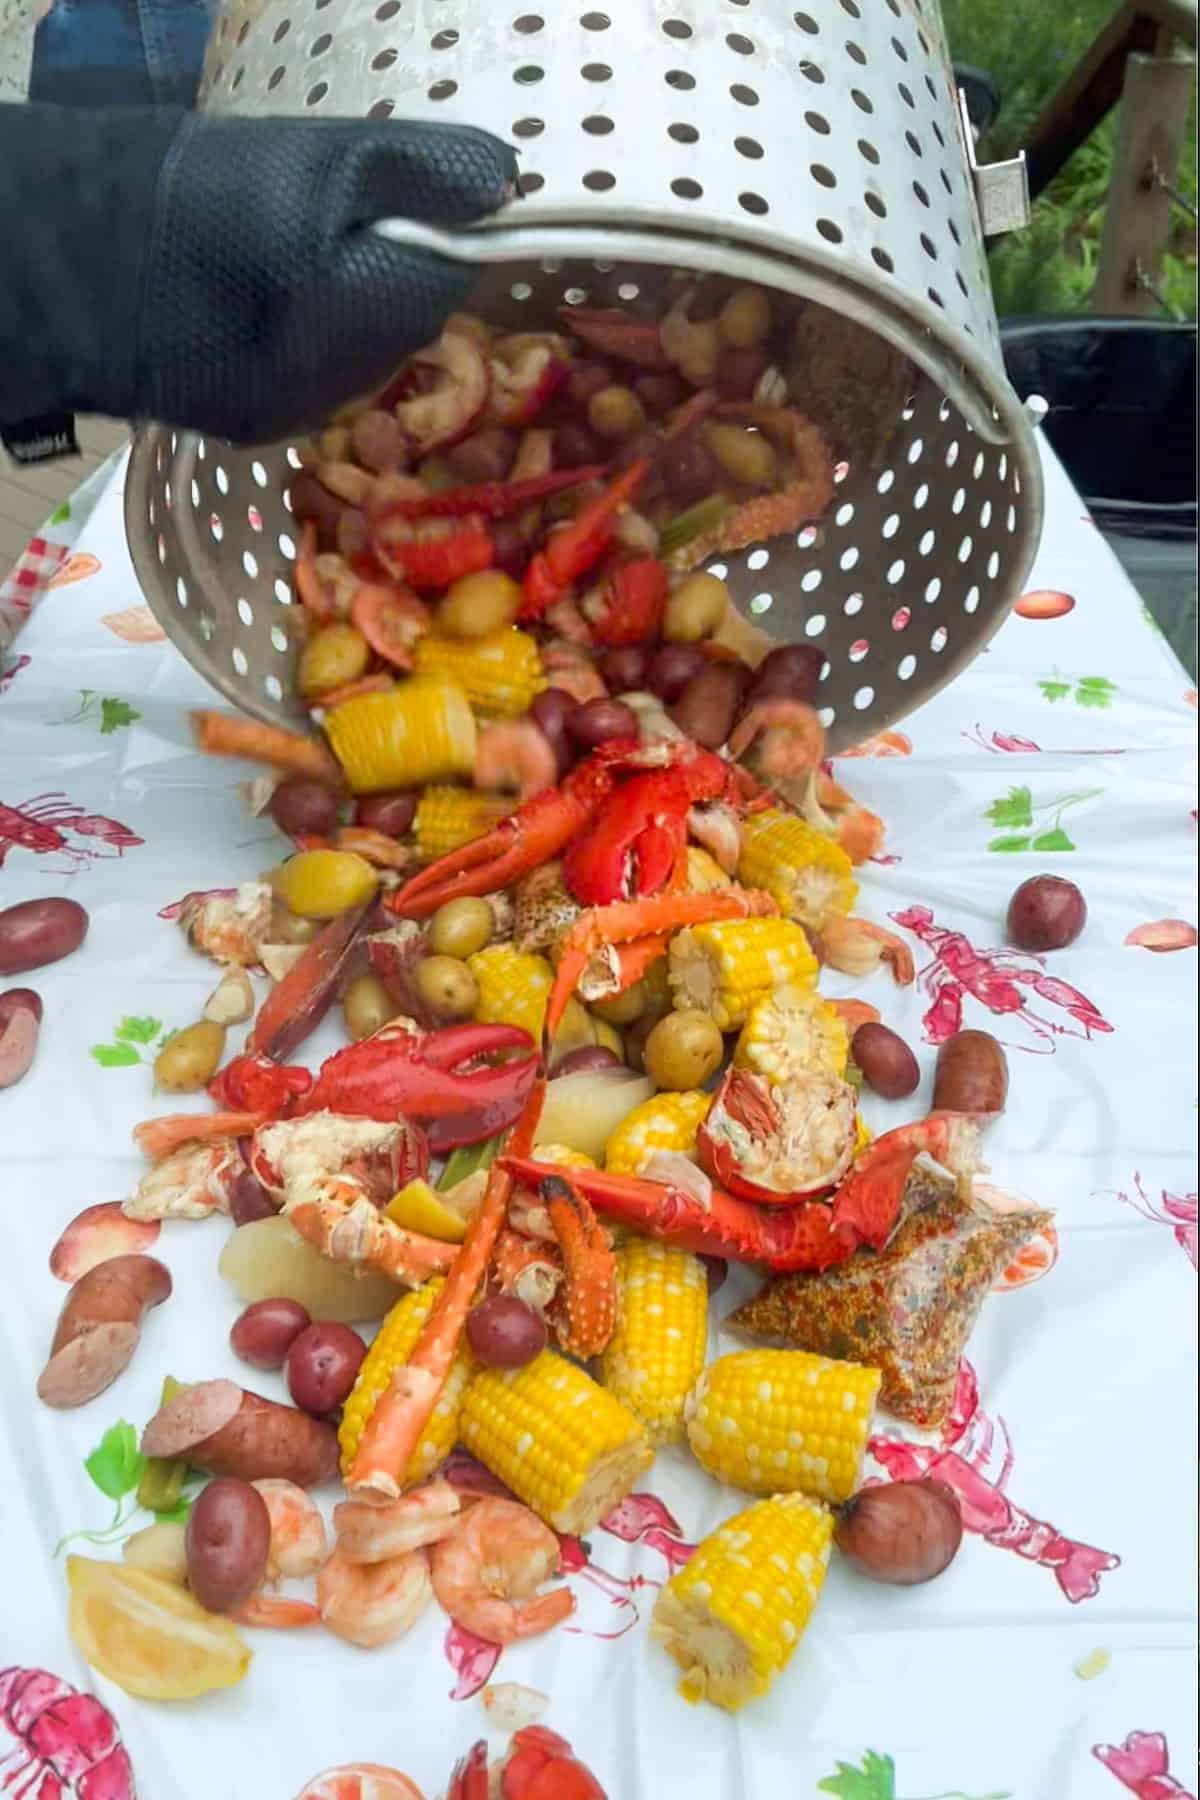 the contents of a huge seafood boiling pot strainer being poured onto a large table. Corn, lobster tails and claws, potatoes, clams, crab legs and sausages.